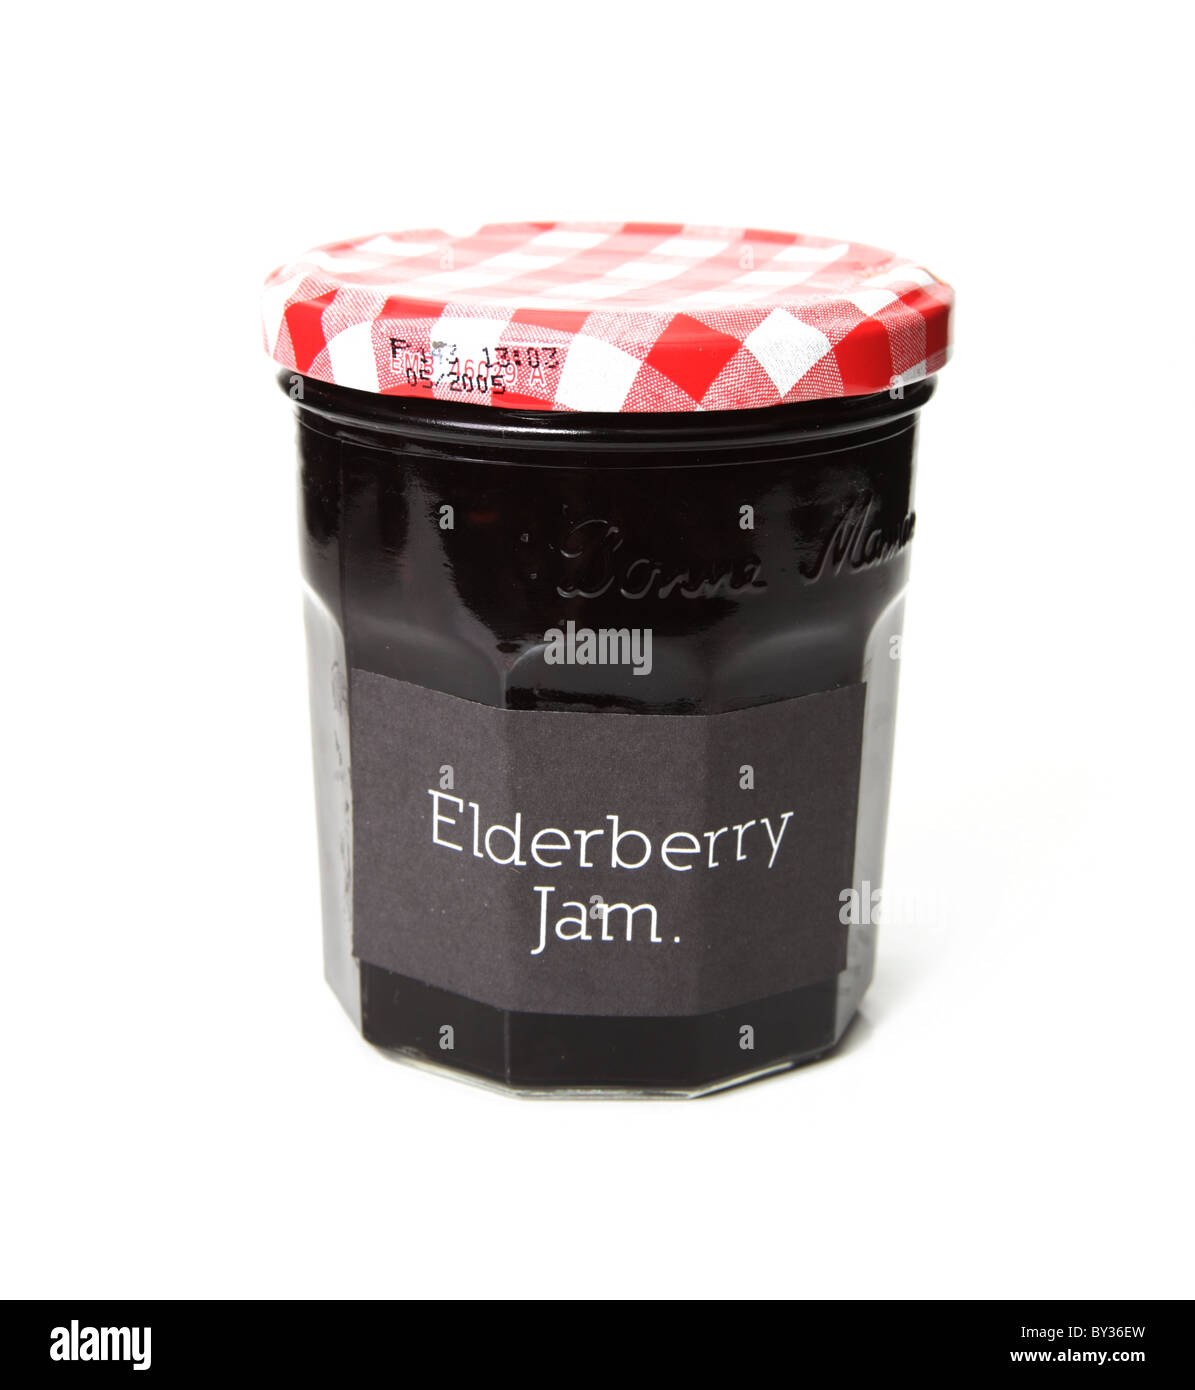 A Jar of Home Made Elderberry Jam on White Background Stock Photo